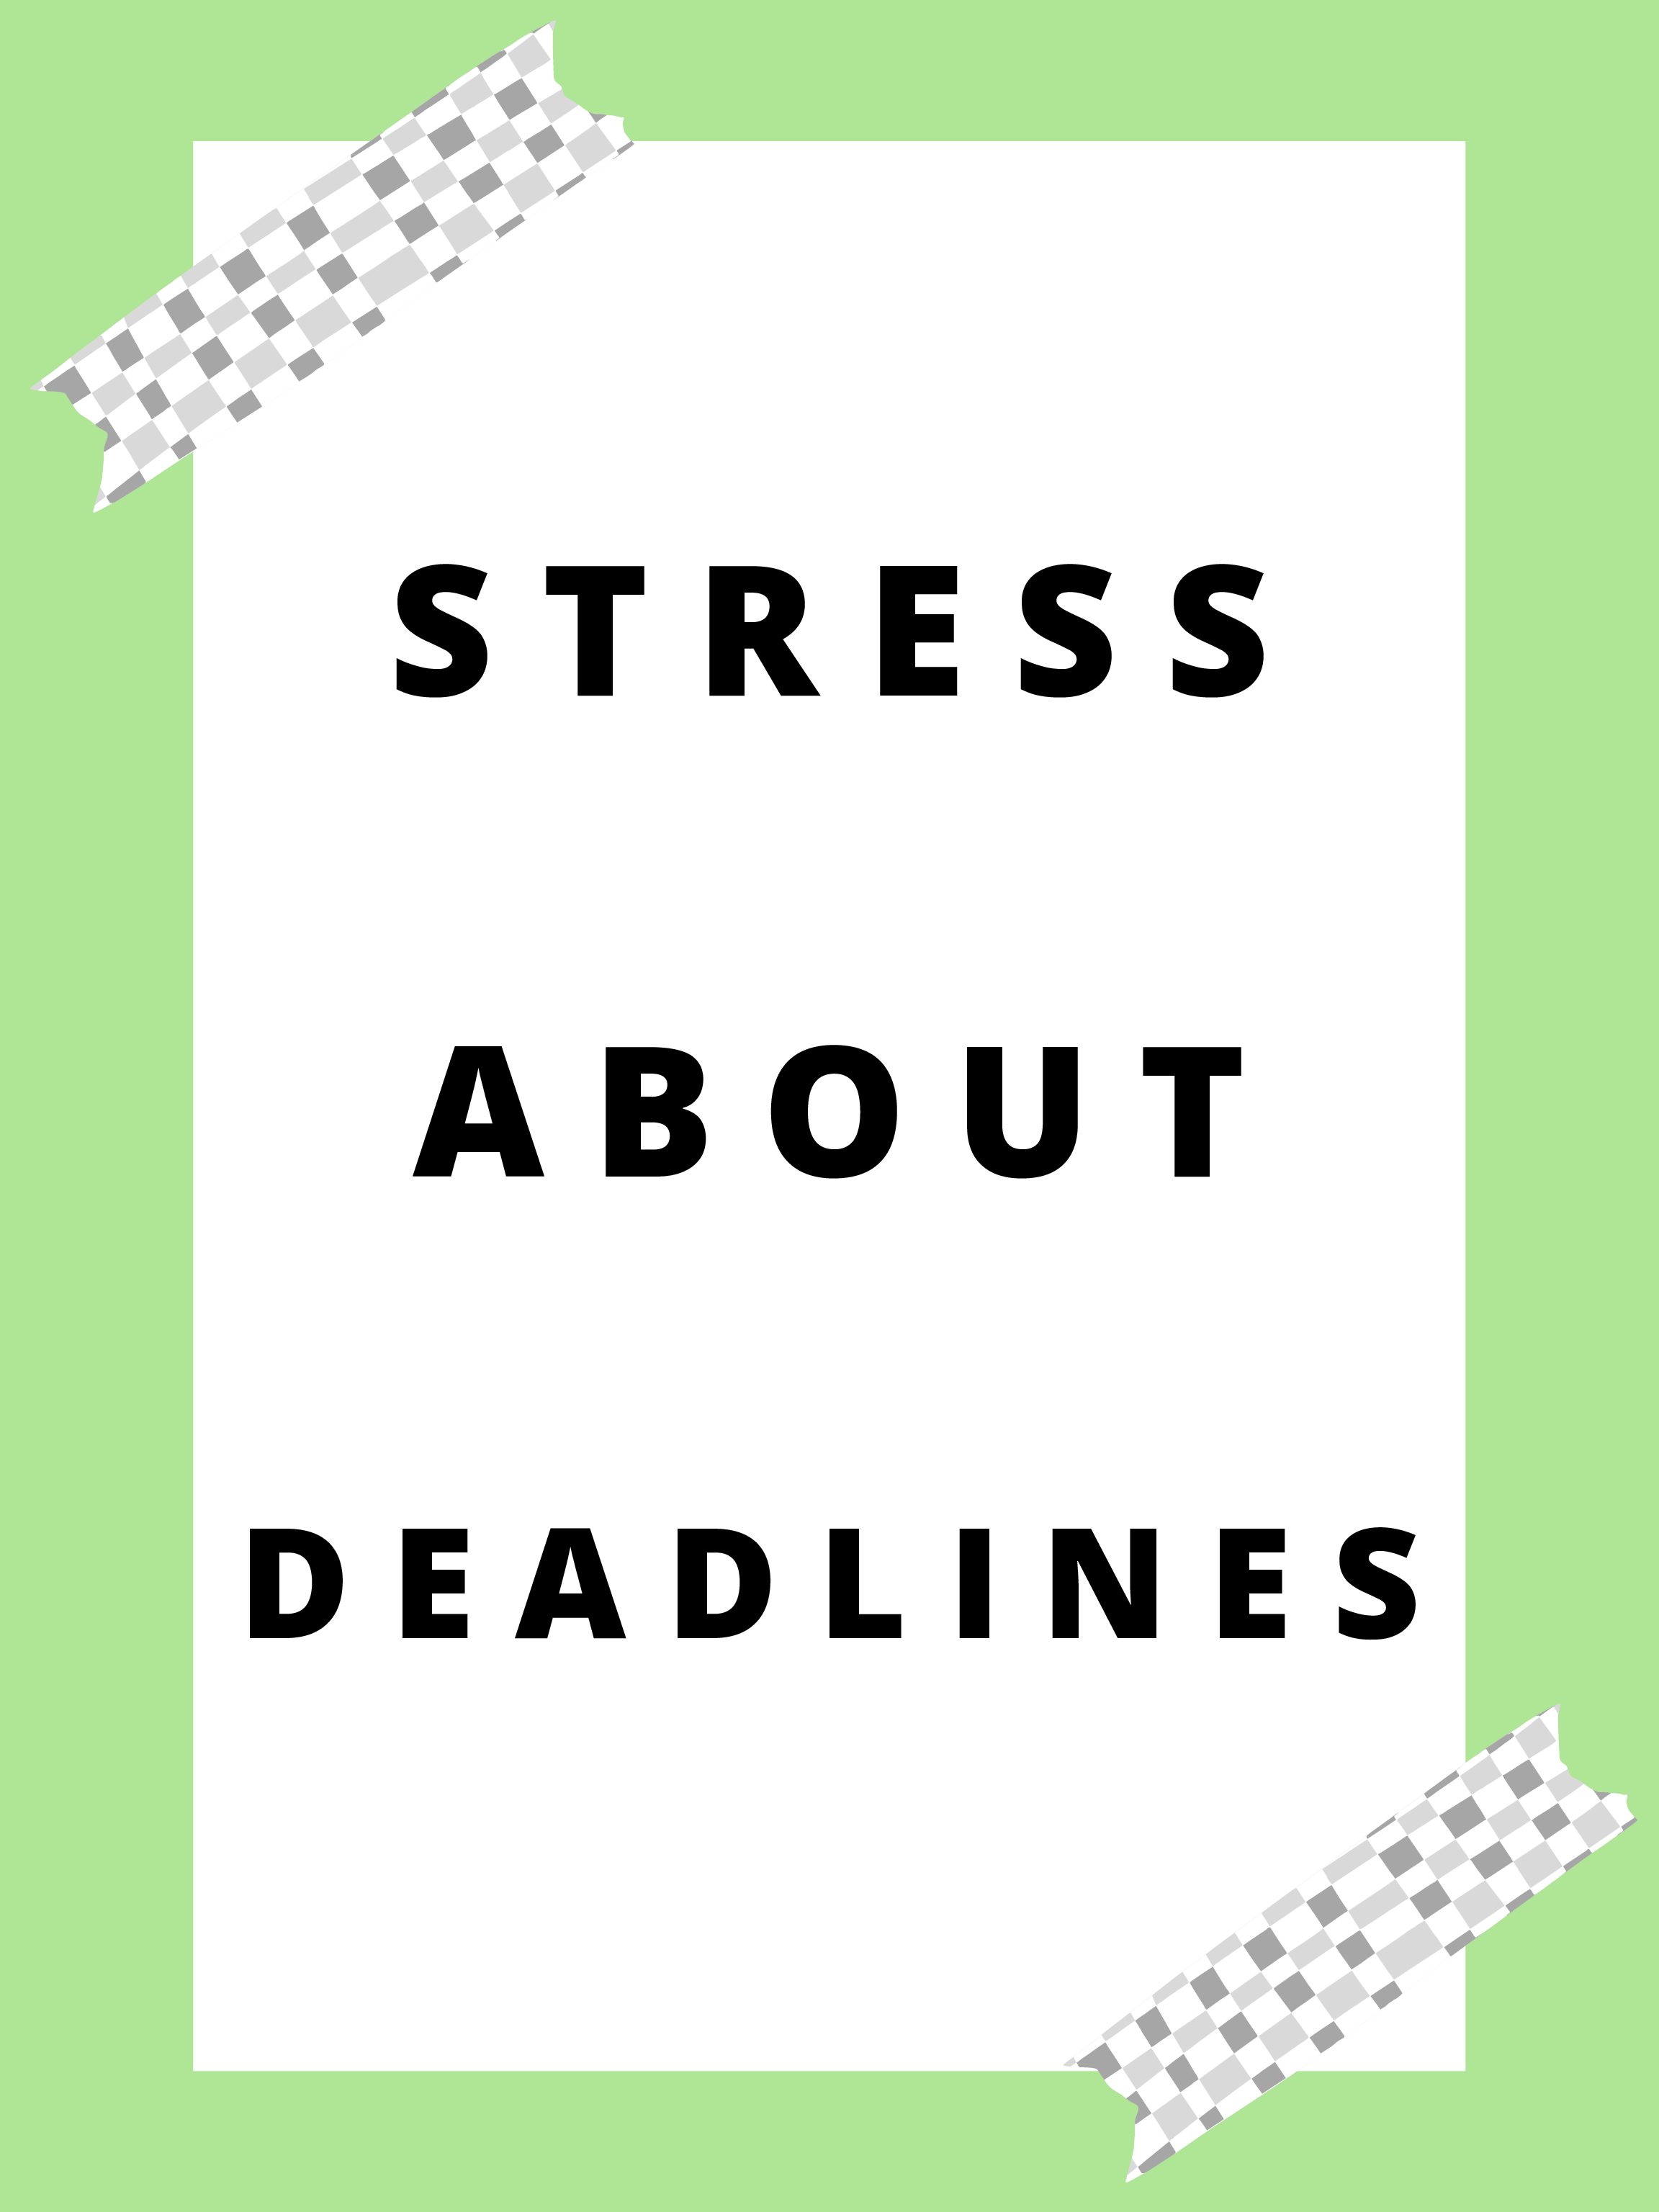 Students are stressing about meeting deadlines